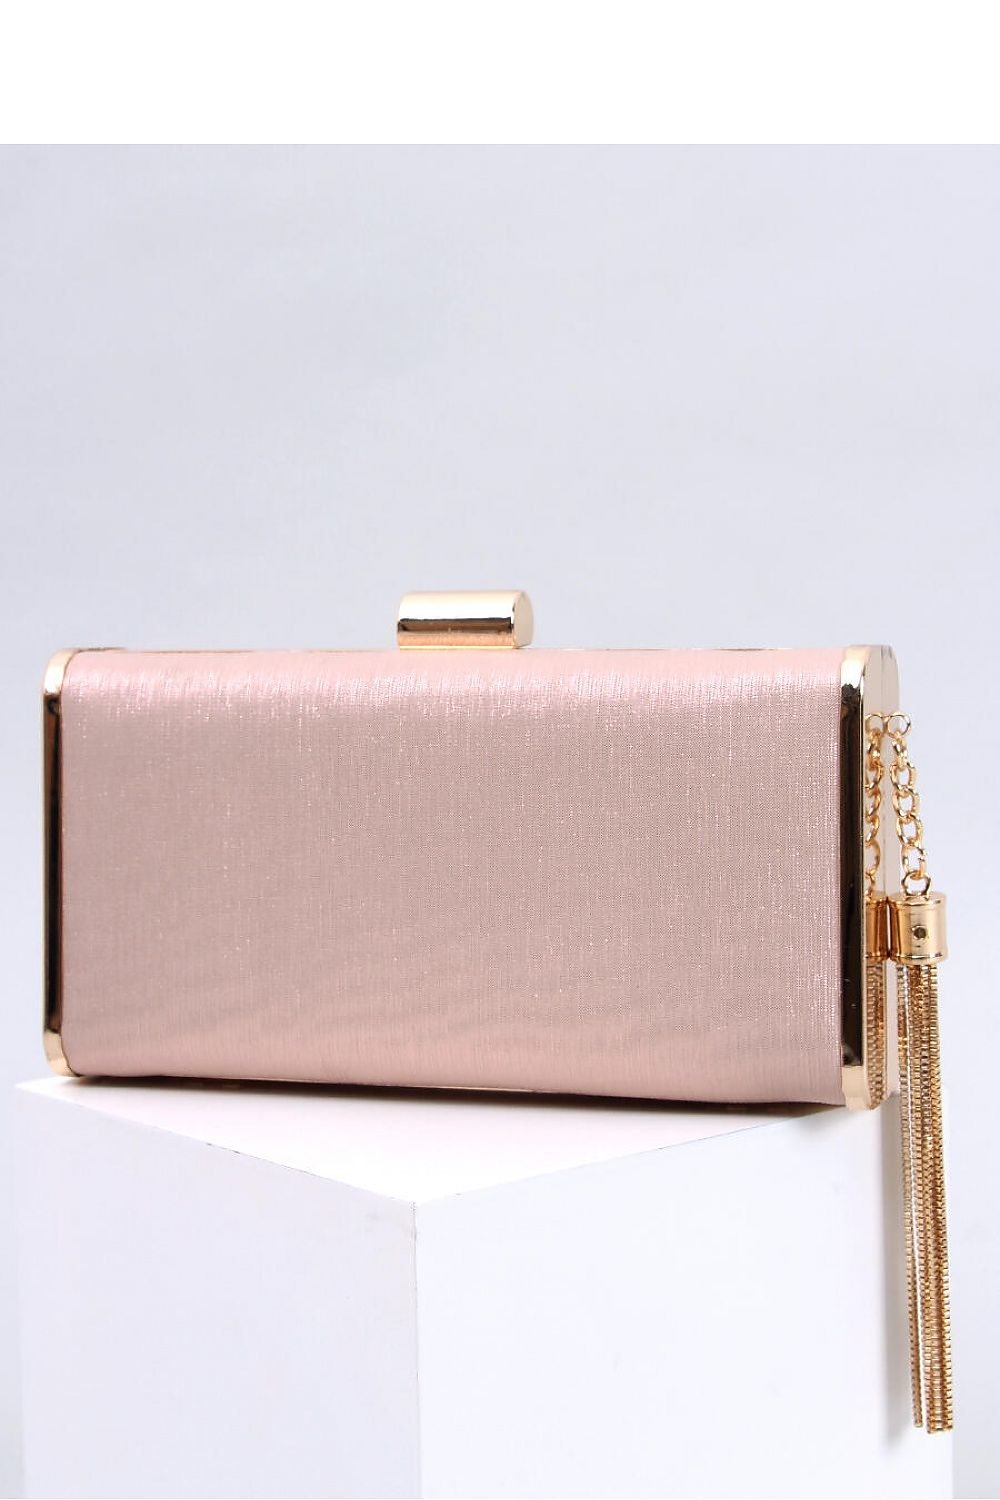 Envelope clutch bag - M&H FashionEnvelope clutch bagM&H FashionM&H Fashion189618_1103876one-size-fits-allEnvelope clutch bag InelloM&H FashionM&H FashionVisitor clutch bag for women with a tassel. This unique model with an iridescent finish is sure to catch the eye.... The handbag can be carried in hand or on a delicEnvelope clutch bag